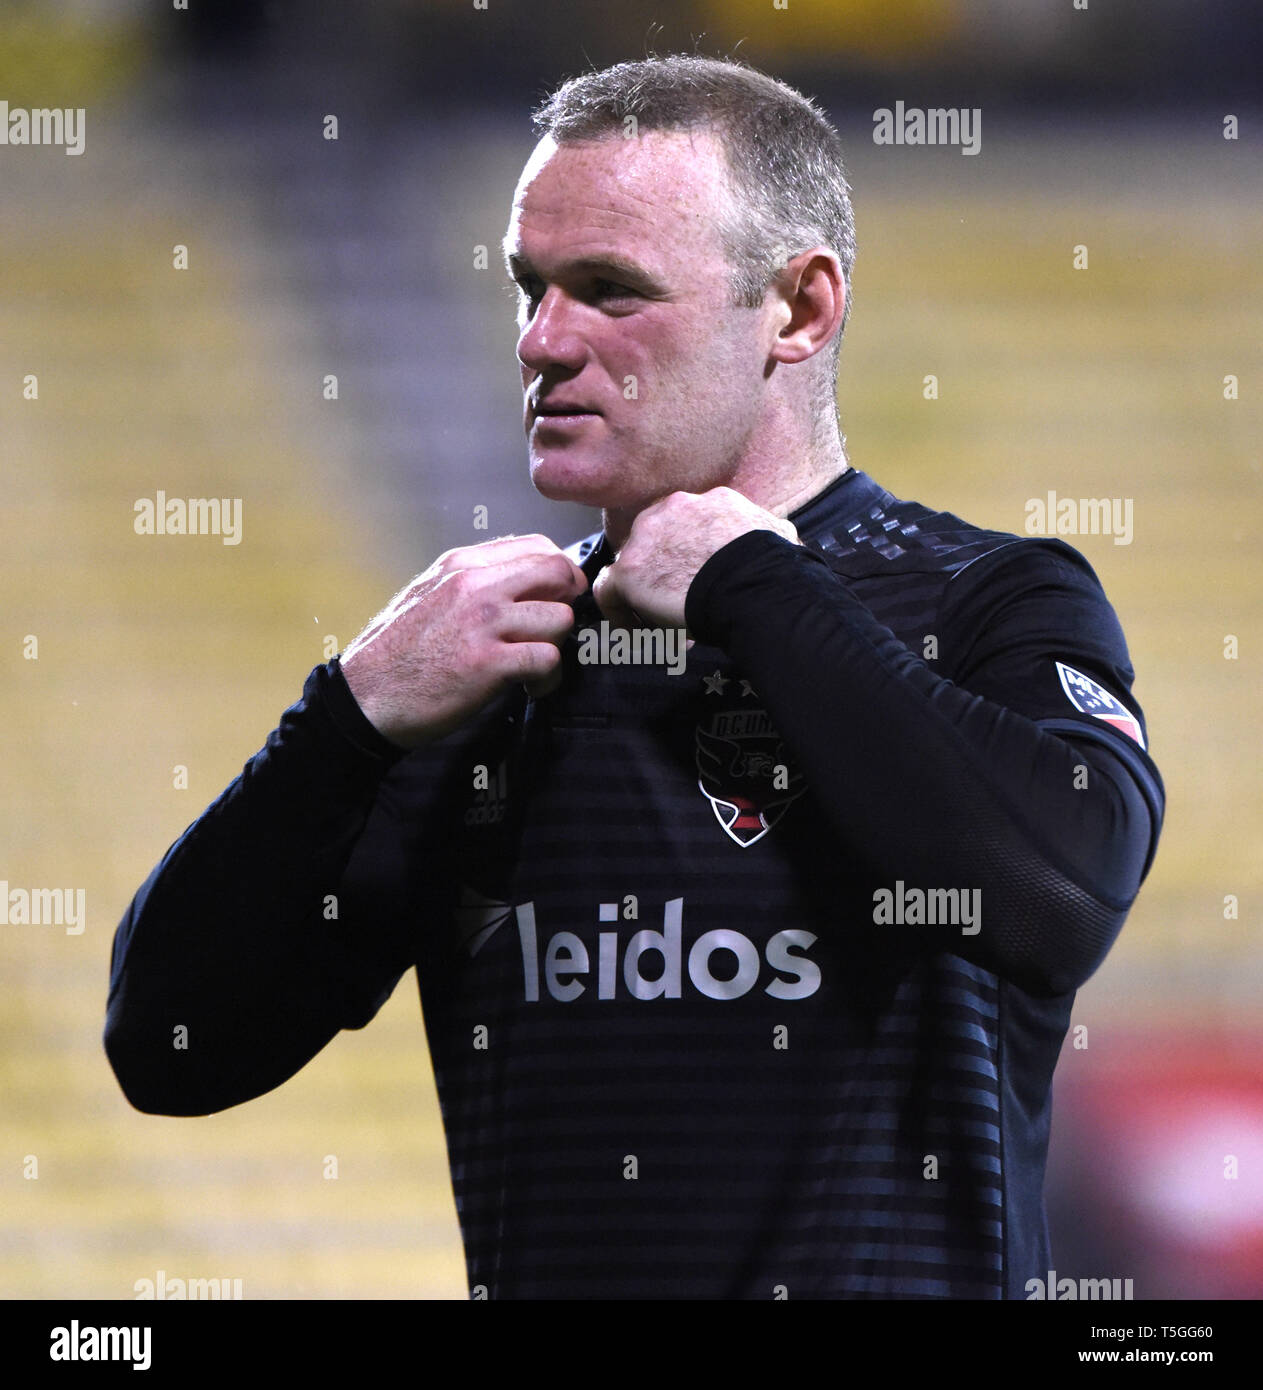 Columbus, OH, USA. 24th Apr, 2019. April 24, 2019: D.C. United forward Wayne Rooney (9) prepares to take off his jersey after the MLS match between DC United and Columbus Crew SC at Mapfre Stadium in Columbus, Ohio. Austyn McFadden/ZUMA Credit: Austyn McFadden/ZUMA Wire/Alamy Live News Stock Photo